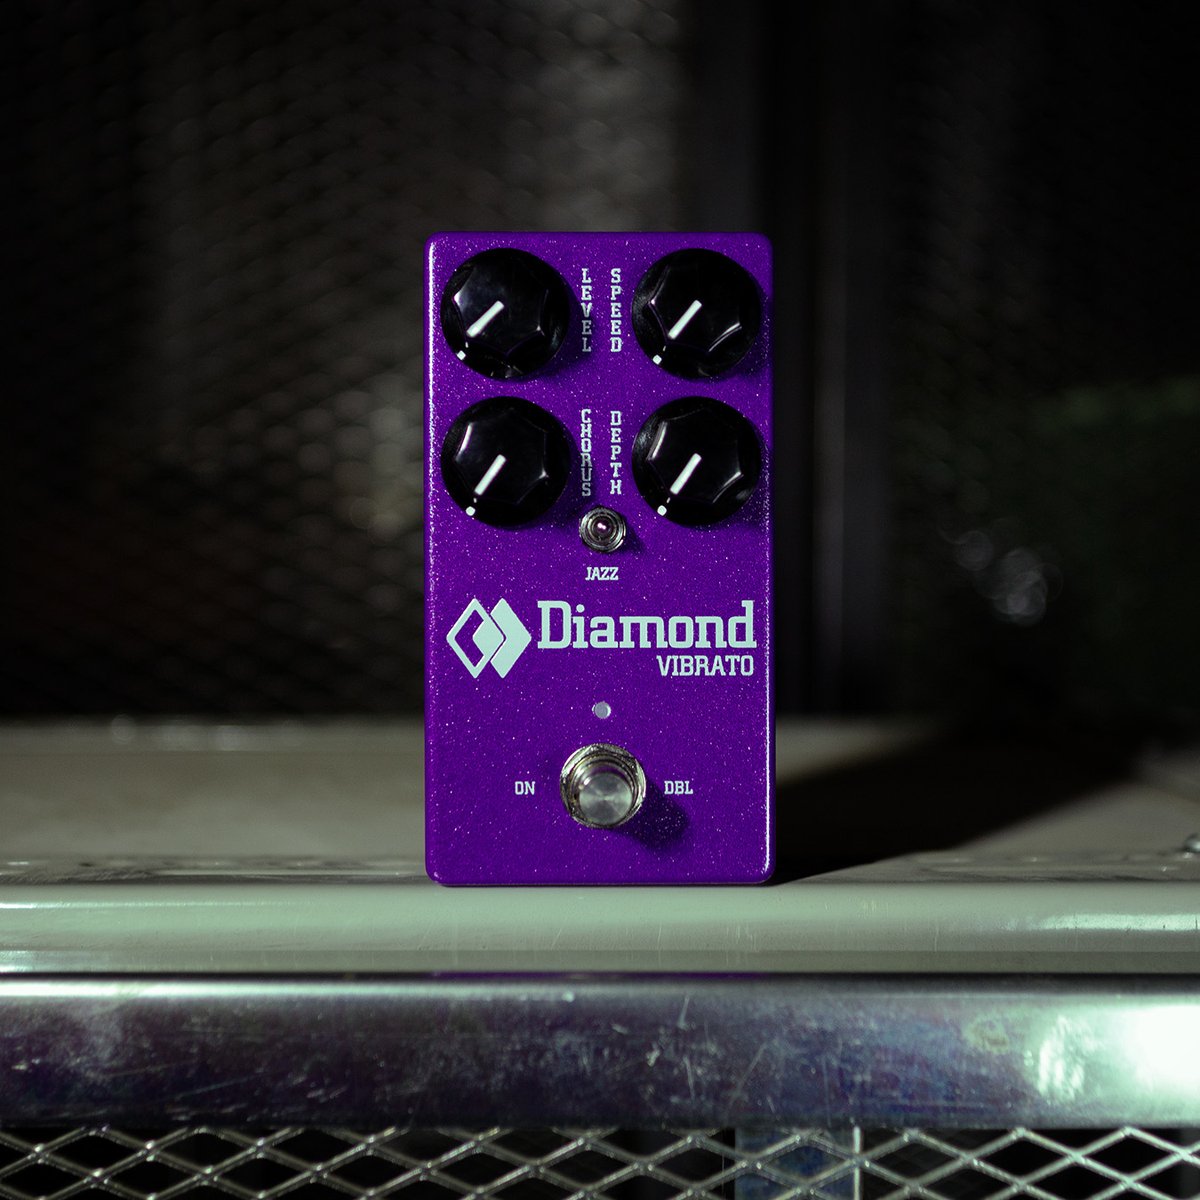 New @DiamondPedals alert! 🚨 Designed with a 100% audio analog path, now with updated features and a compact footprint, shop the Diamond Pedals Vibrato pedal at Chicago Music Exchange today! bit.ly/3Cay3hw #chicagomusicexchange #Diamond #DiamondPedals